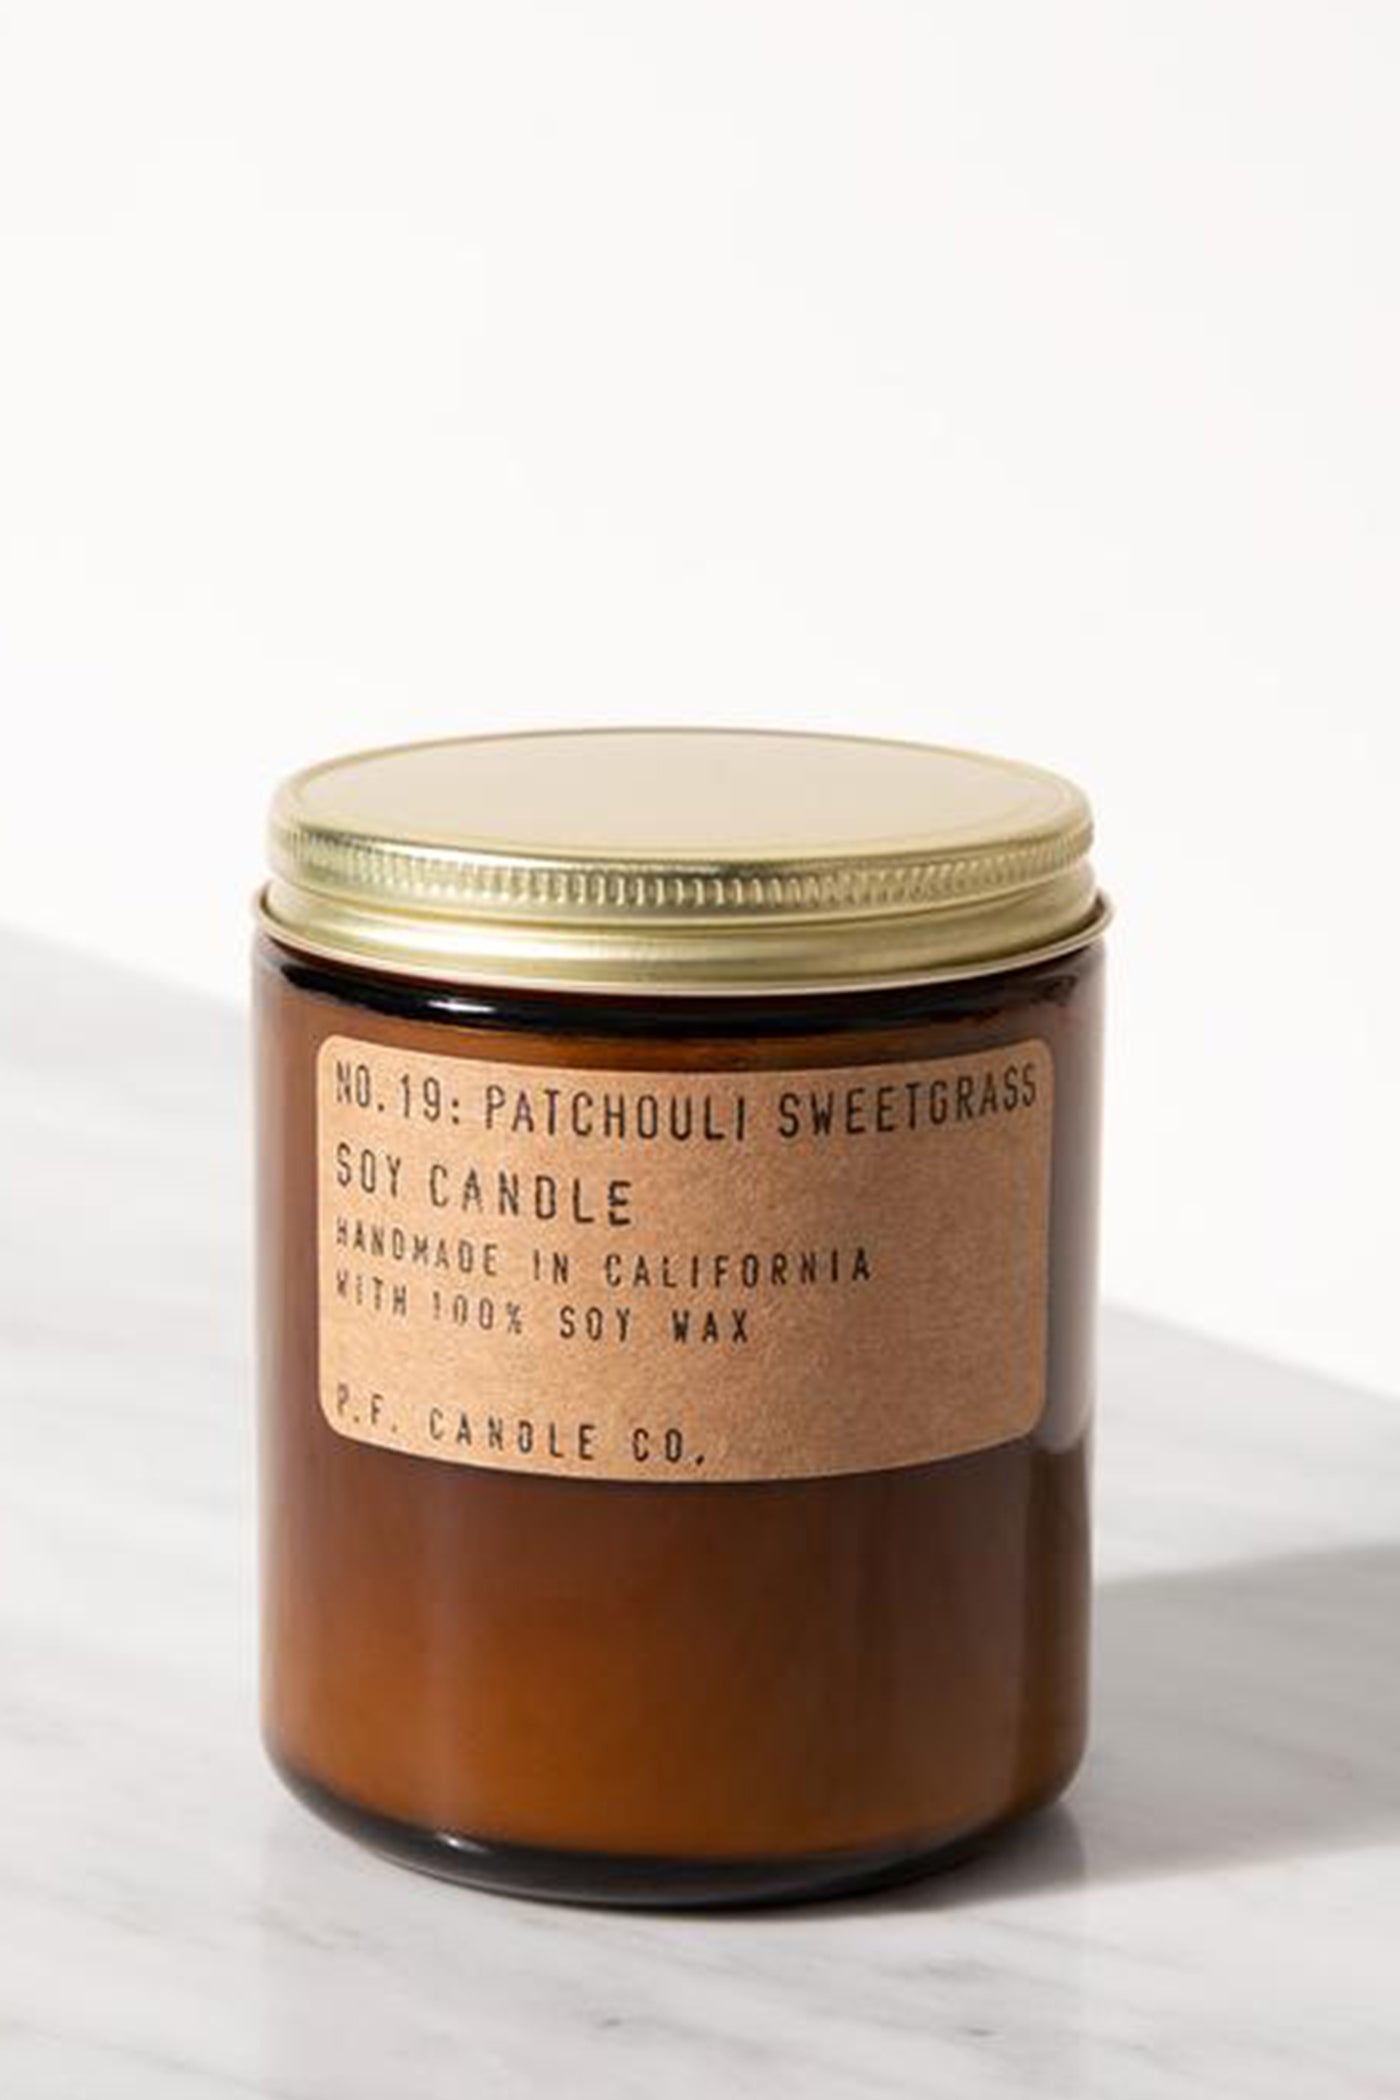 Patchouli Sweetgrass P.F. Soy Candle 7.2oz